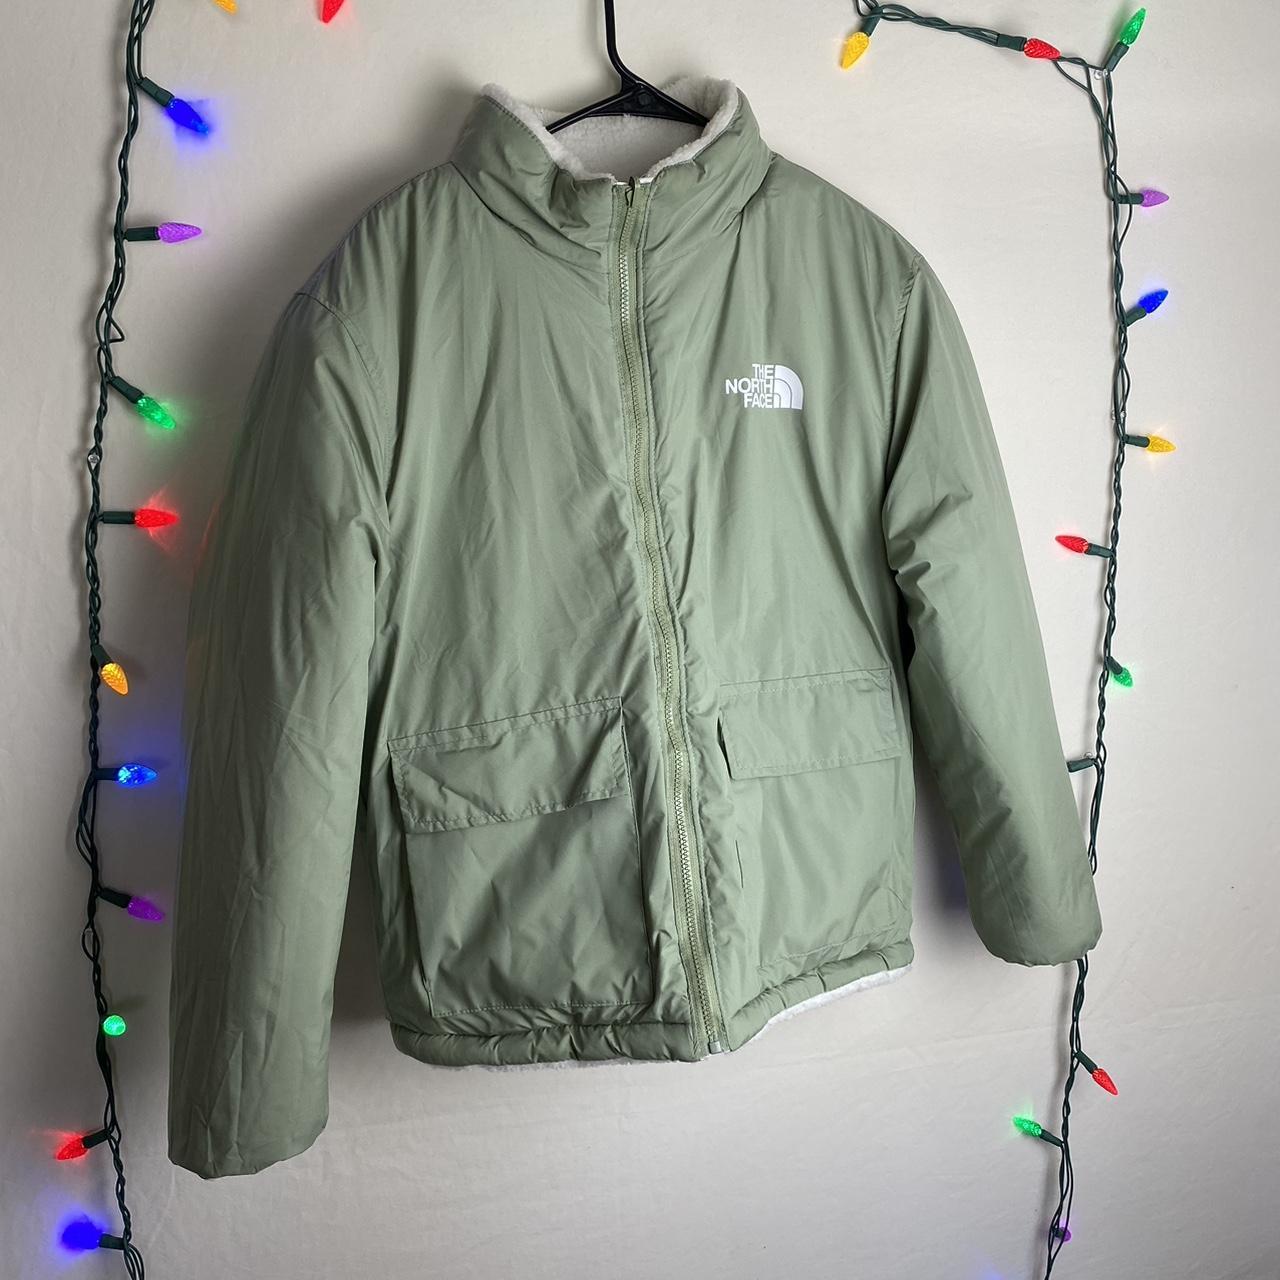 The North Face Women's White and Green Jacket (5)